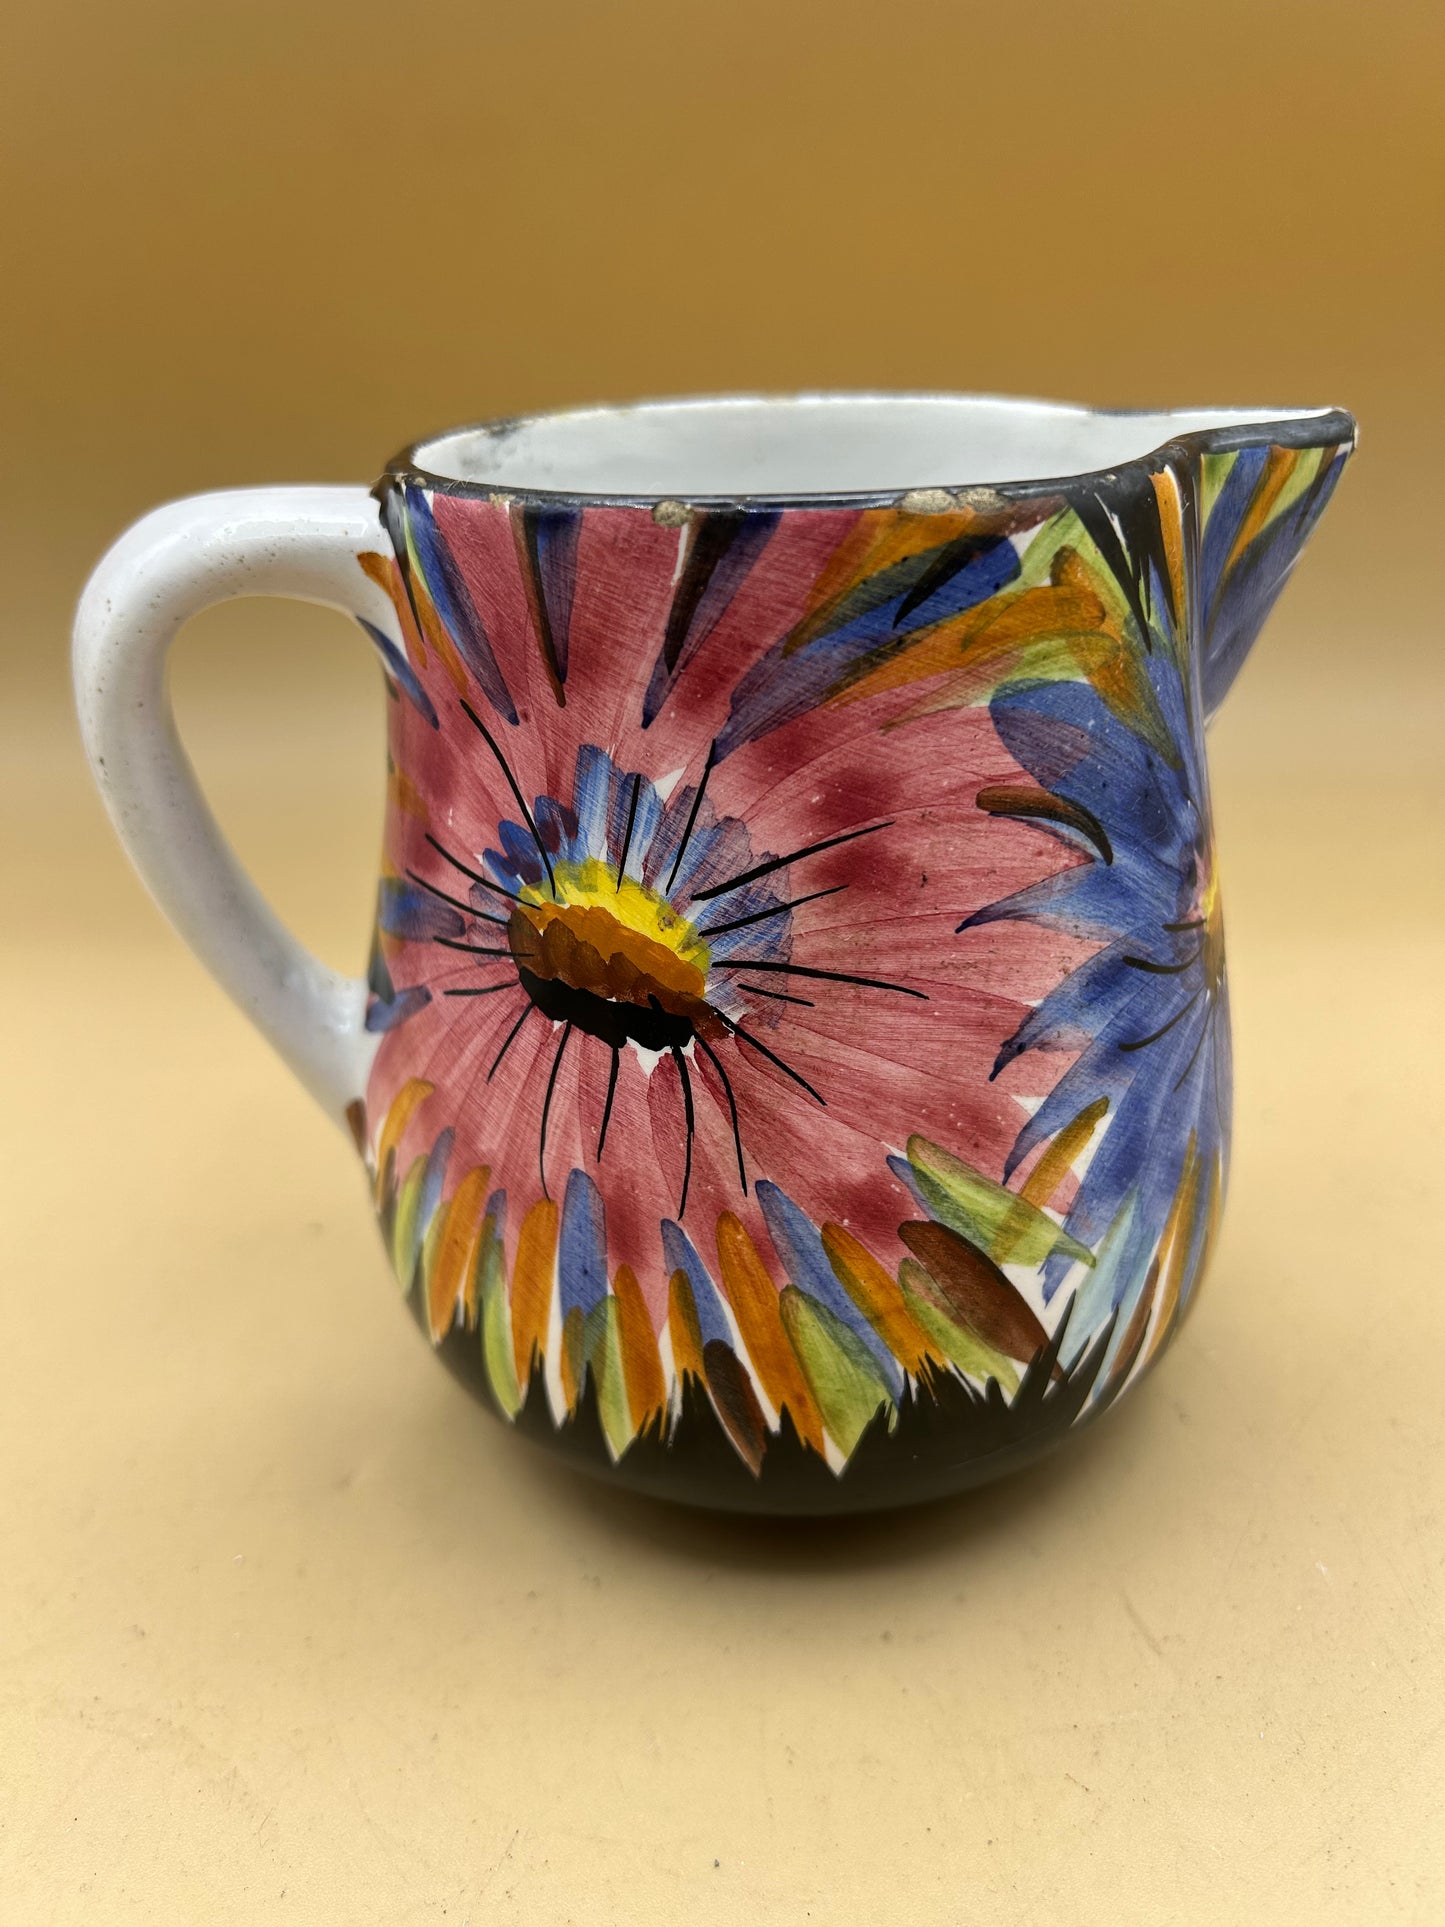 Hand-painted ceramic jug with flowers